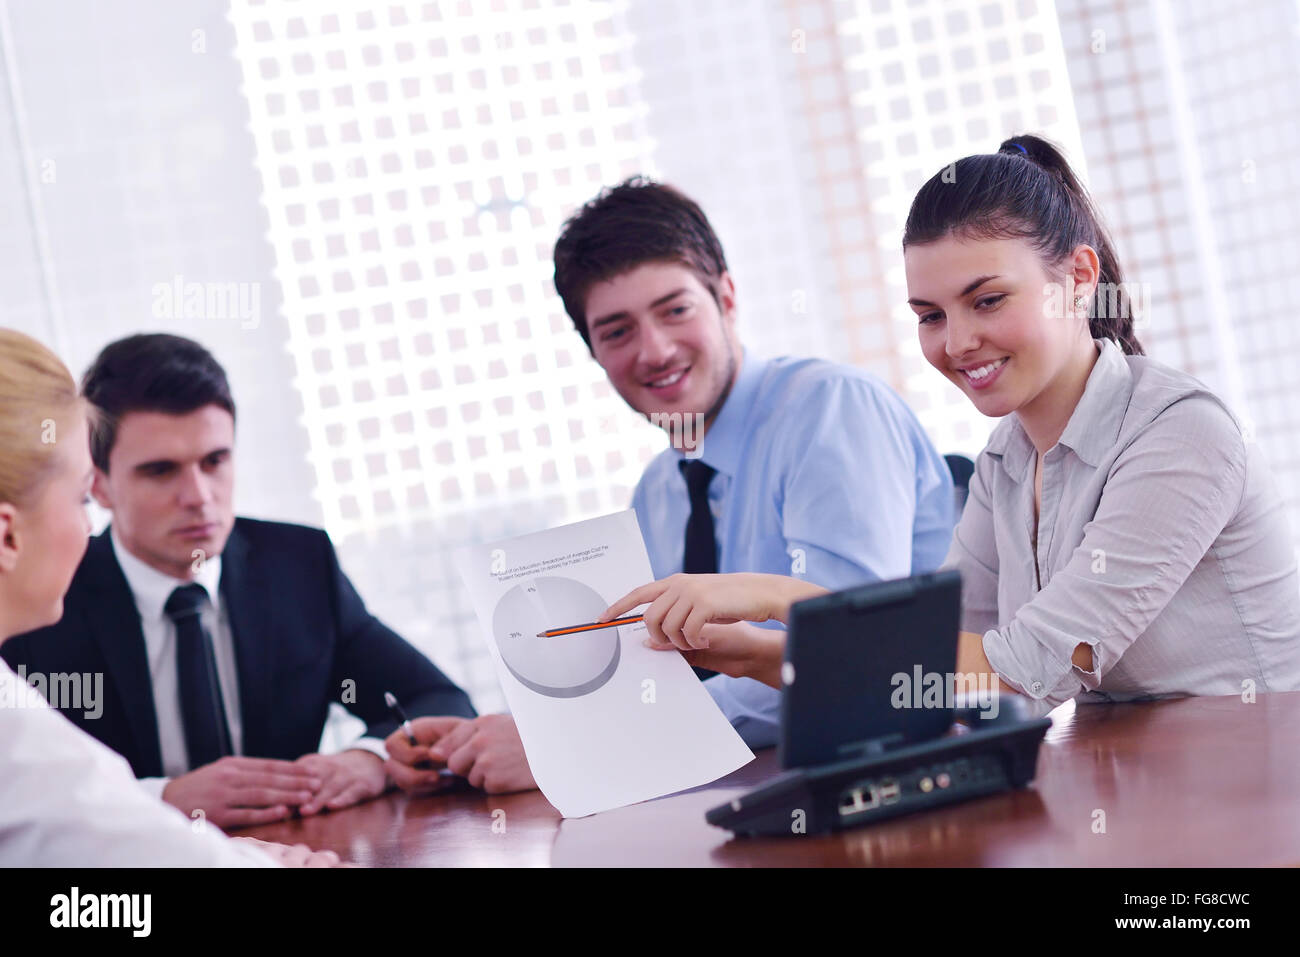 business people in a video meeting Stock Photo